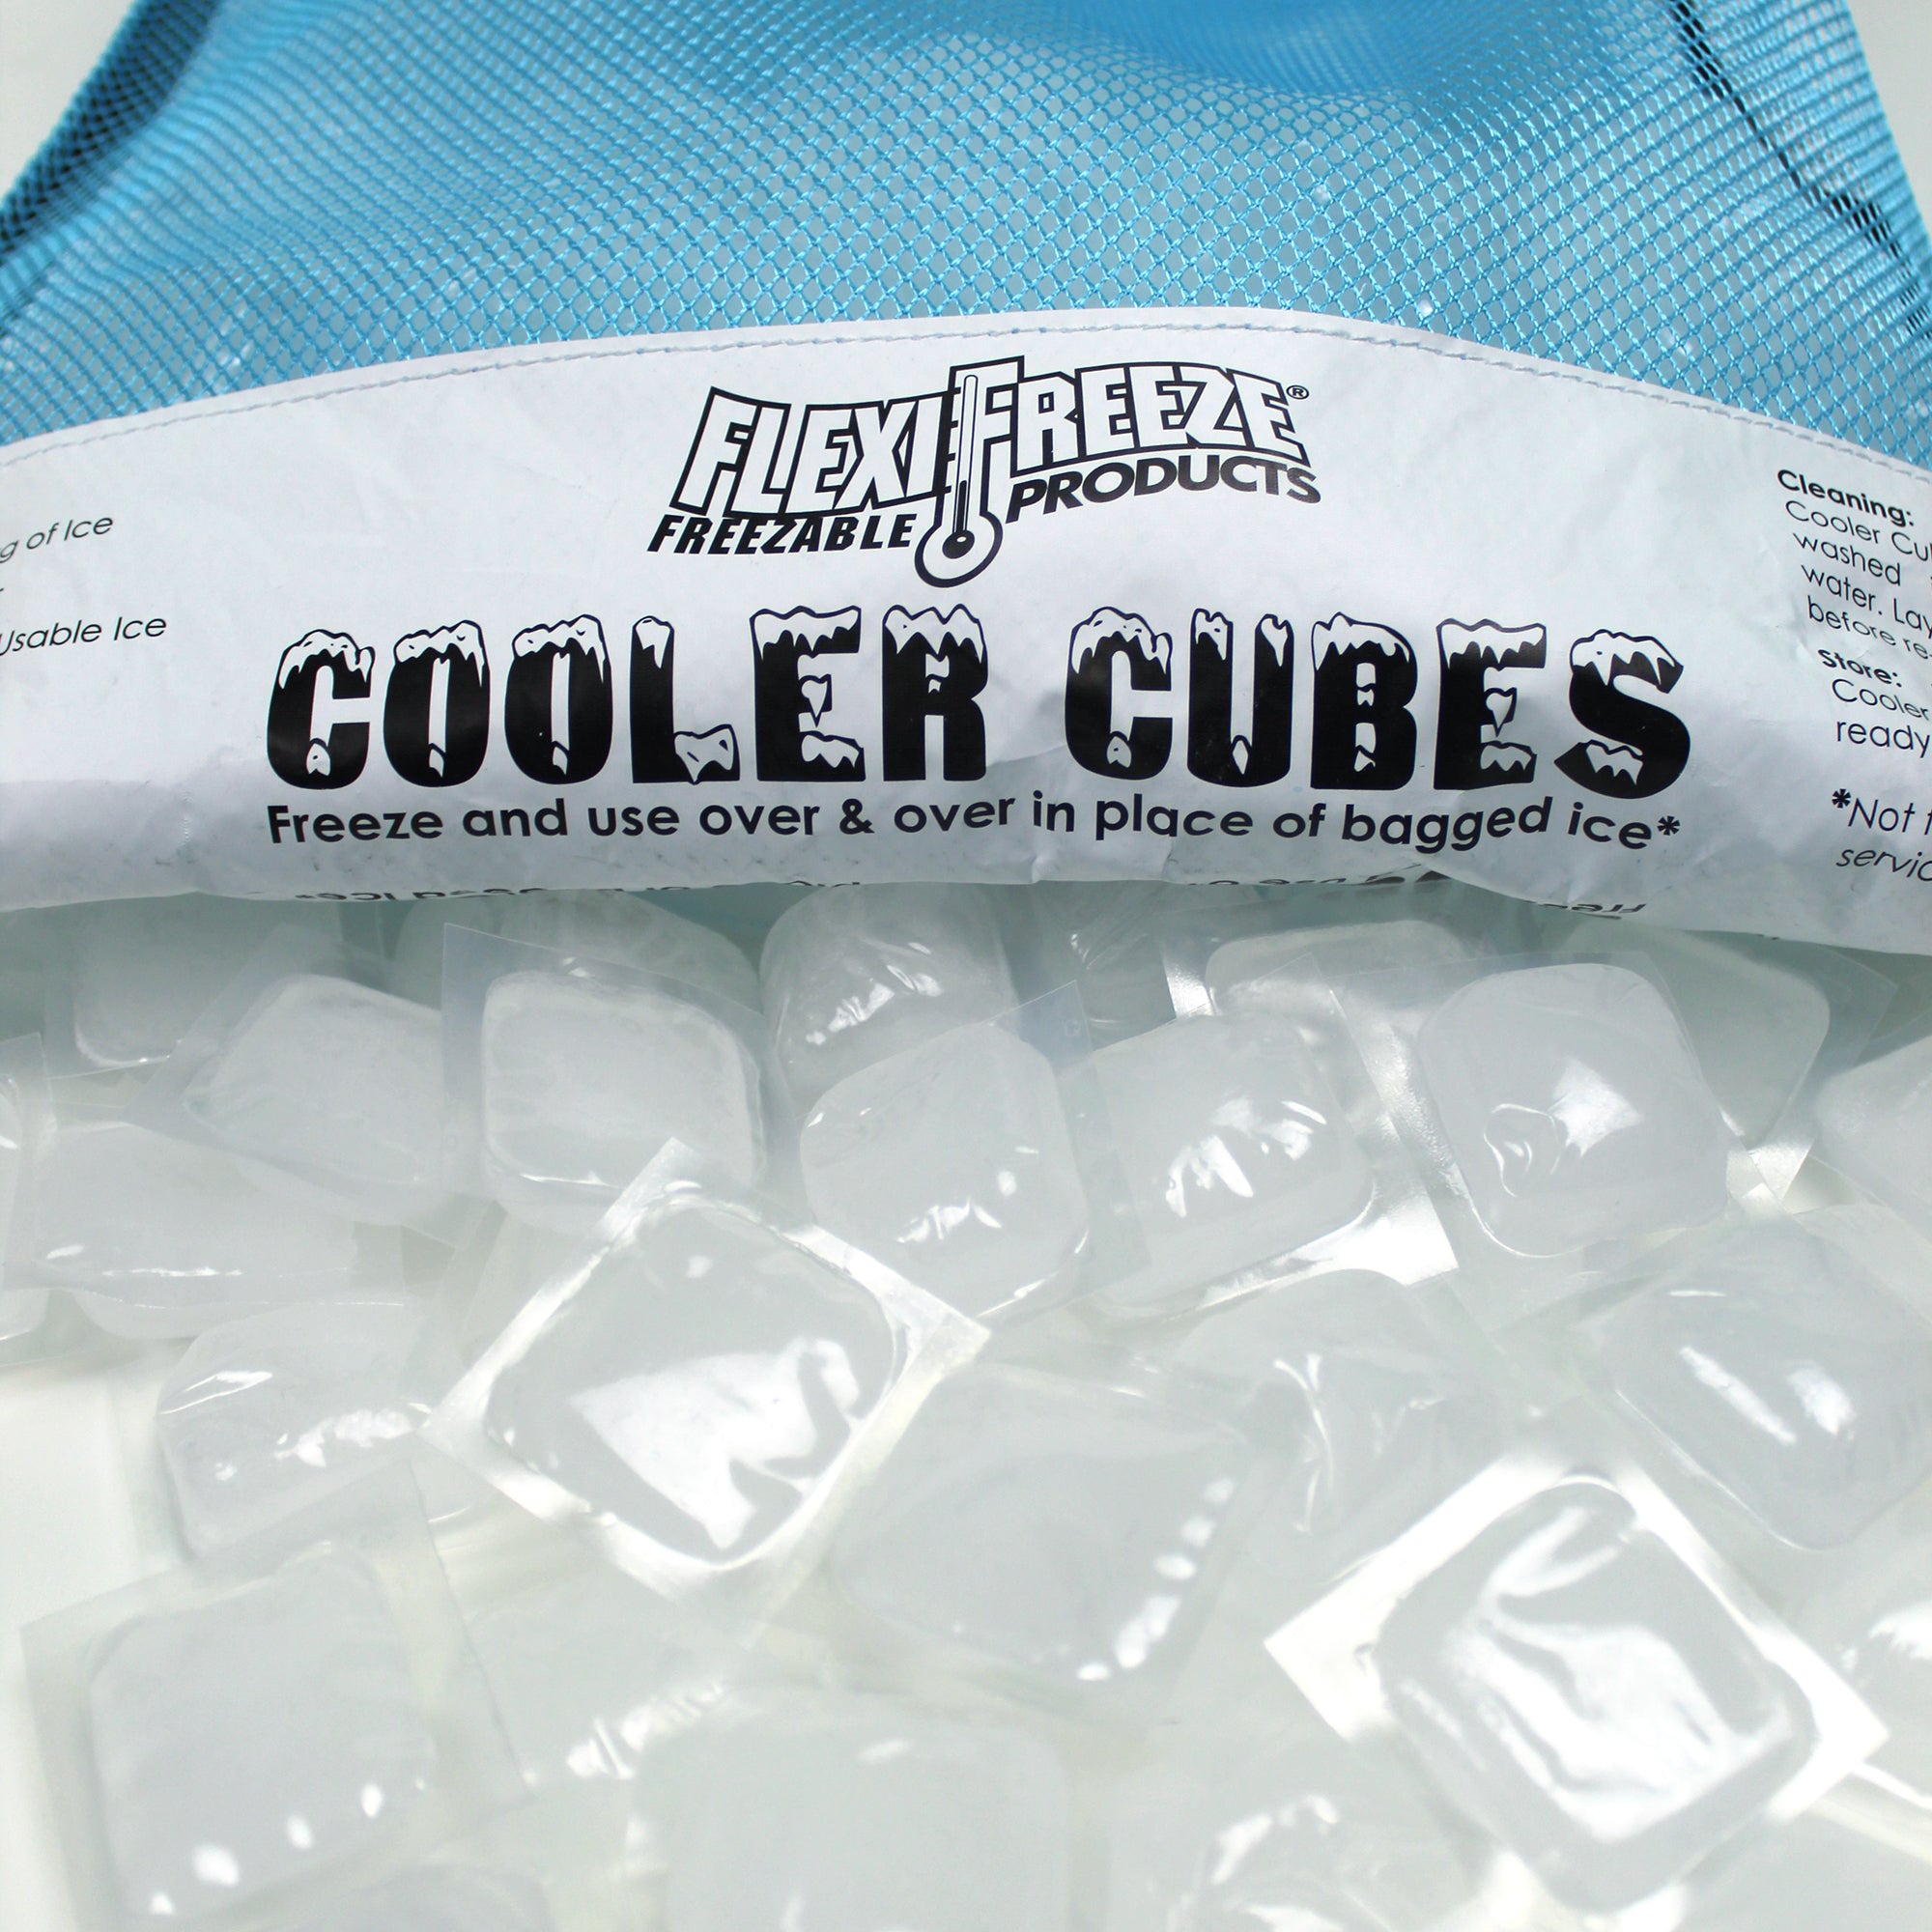 FlexiFreeze cooler cubes bag of individual refreezable ice cubes spilling out